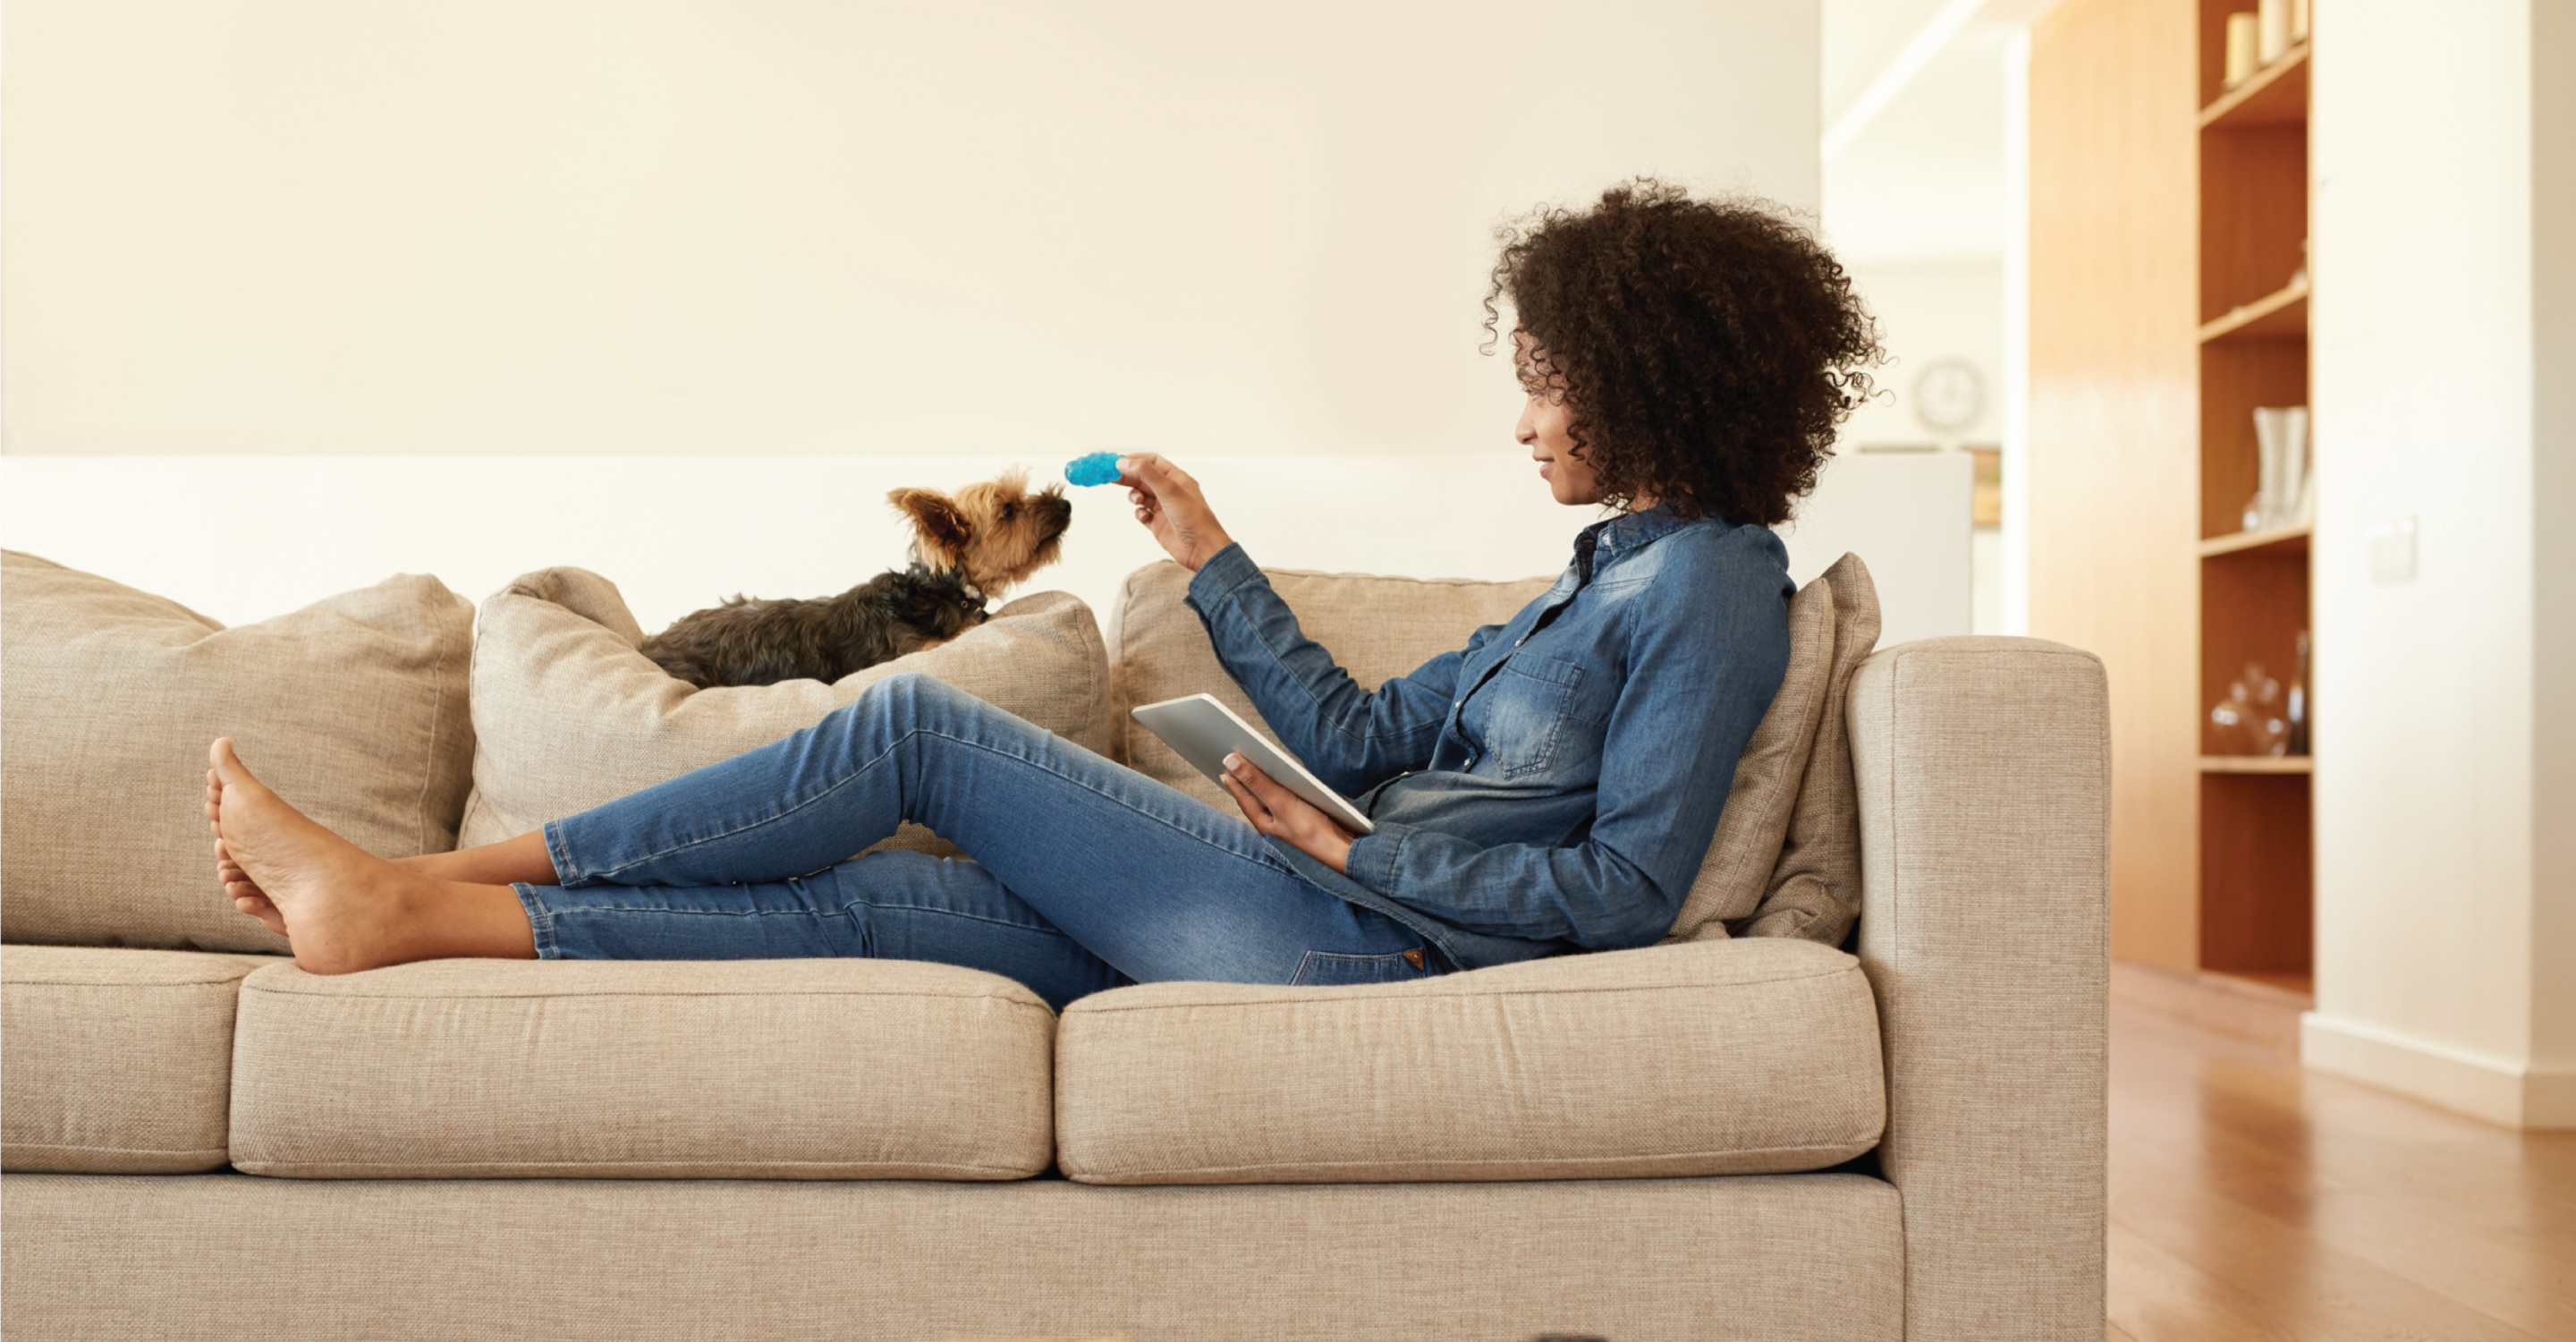 Girl On Couch With Dog